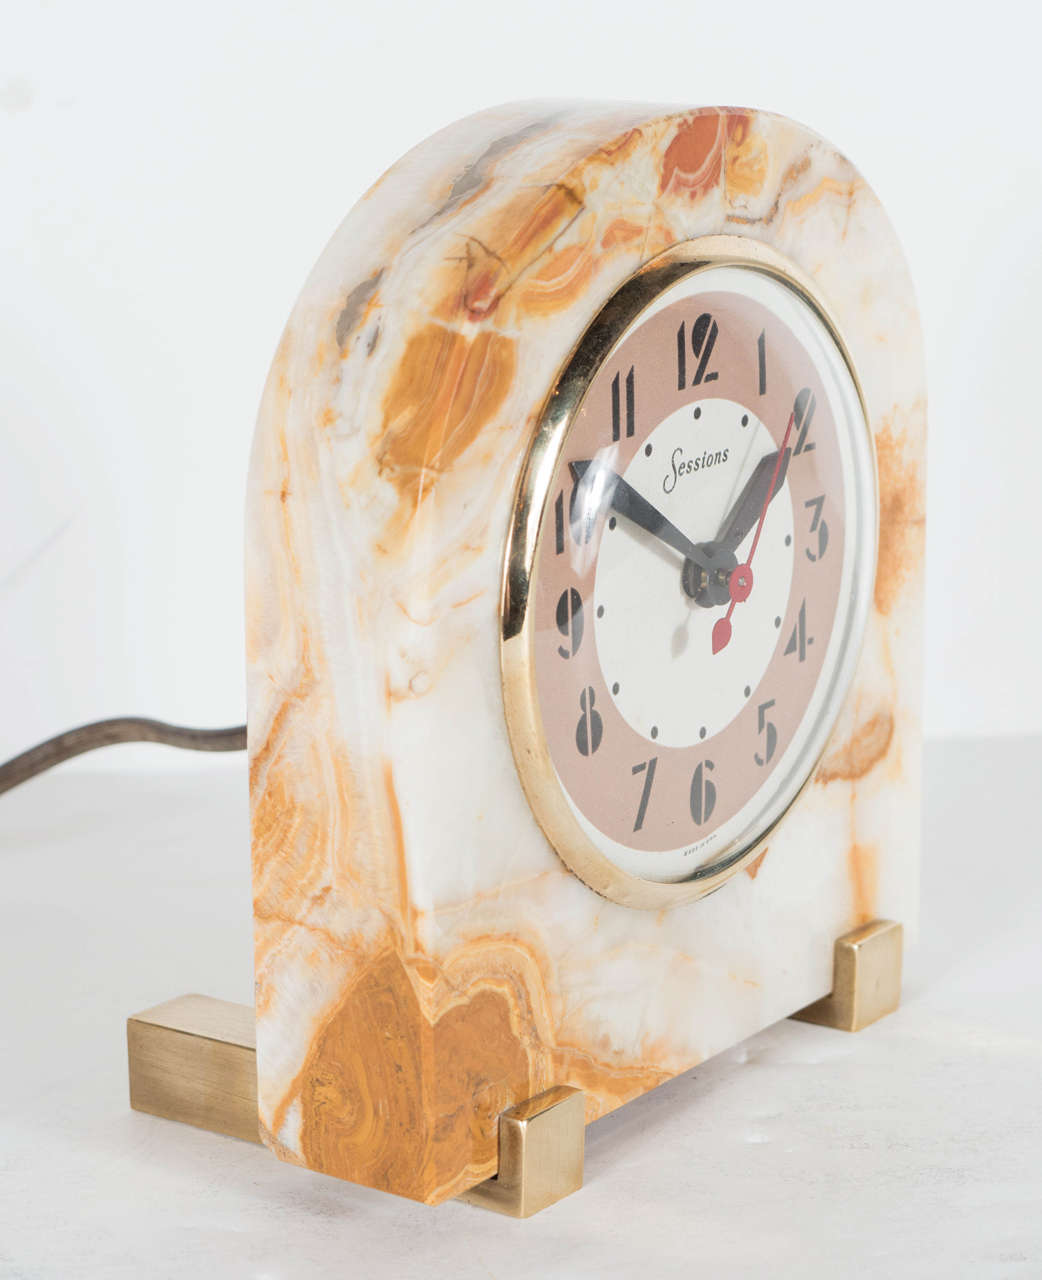 This outstanding Art Deco electric clock by Sessions features an exotic onyx surround with solid brass banded supports, a circular face with glass dome cover and brass trim and numeric numbers to indicate the hour. In perfect working order.